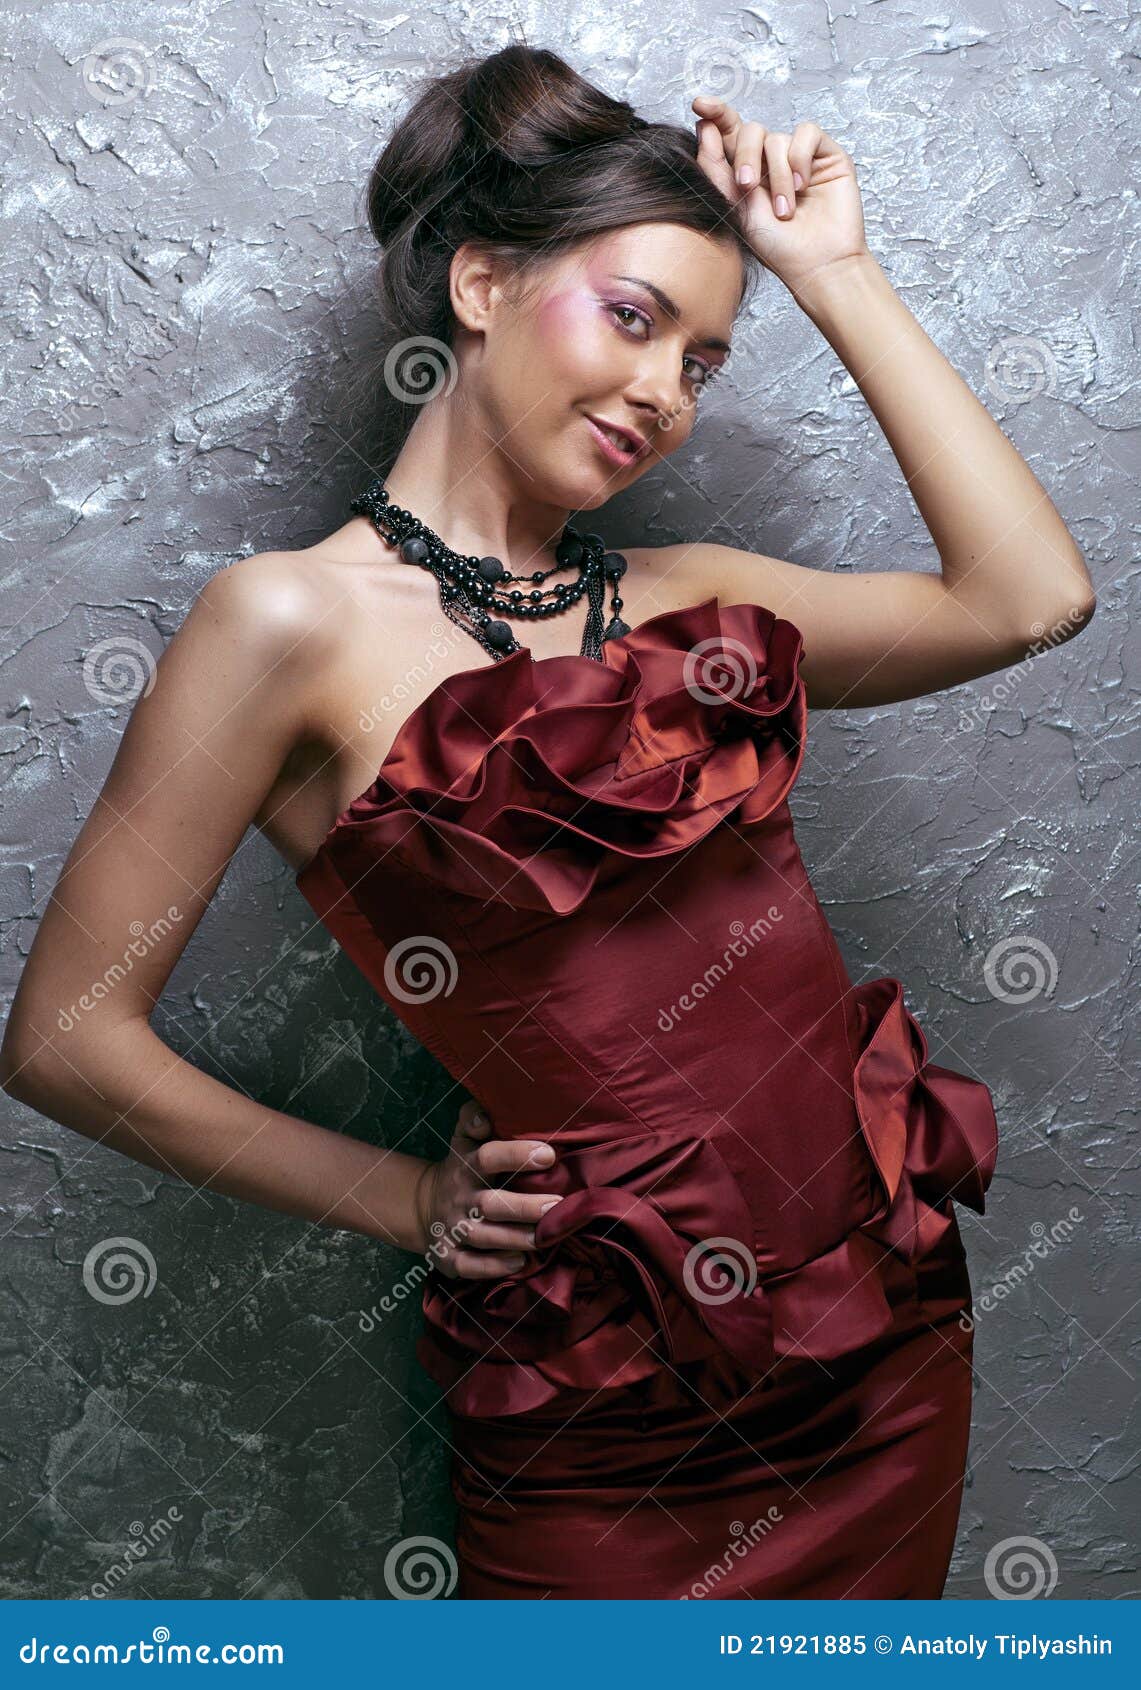 Beauty woman in red dress stock image. Image of hair - 21921885